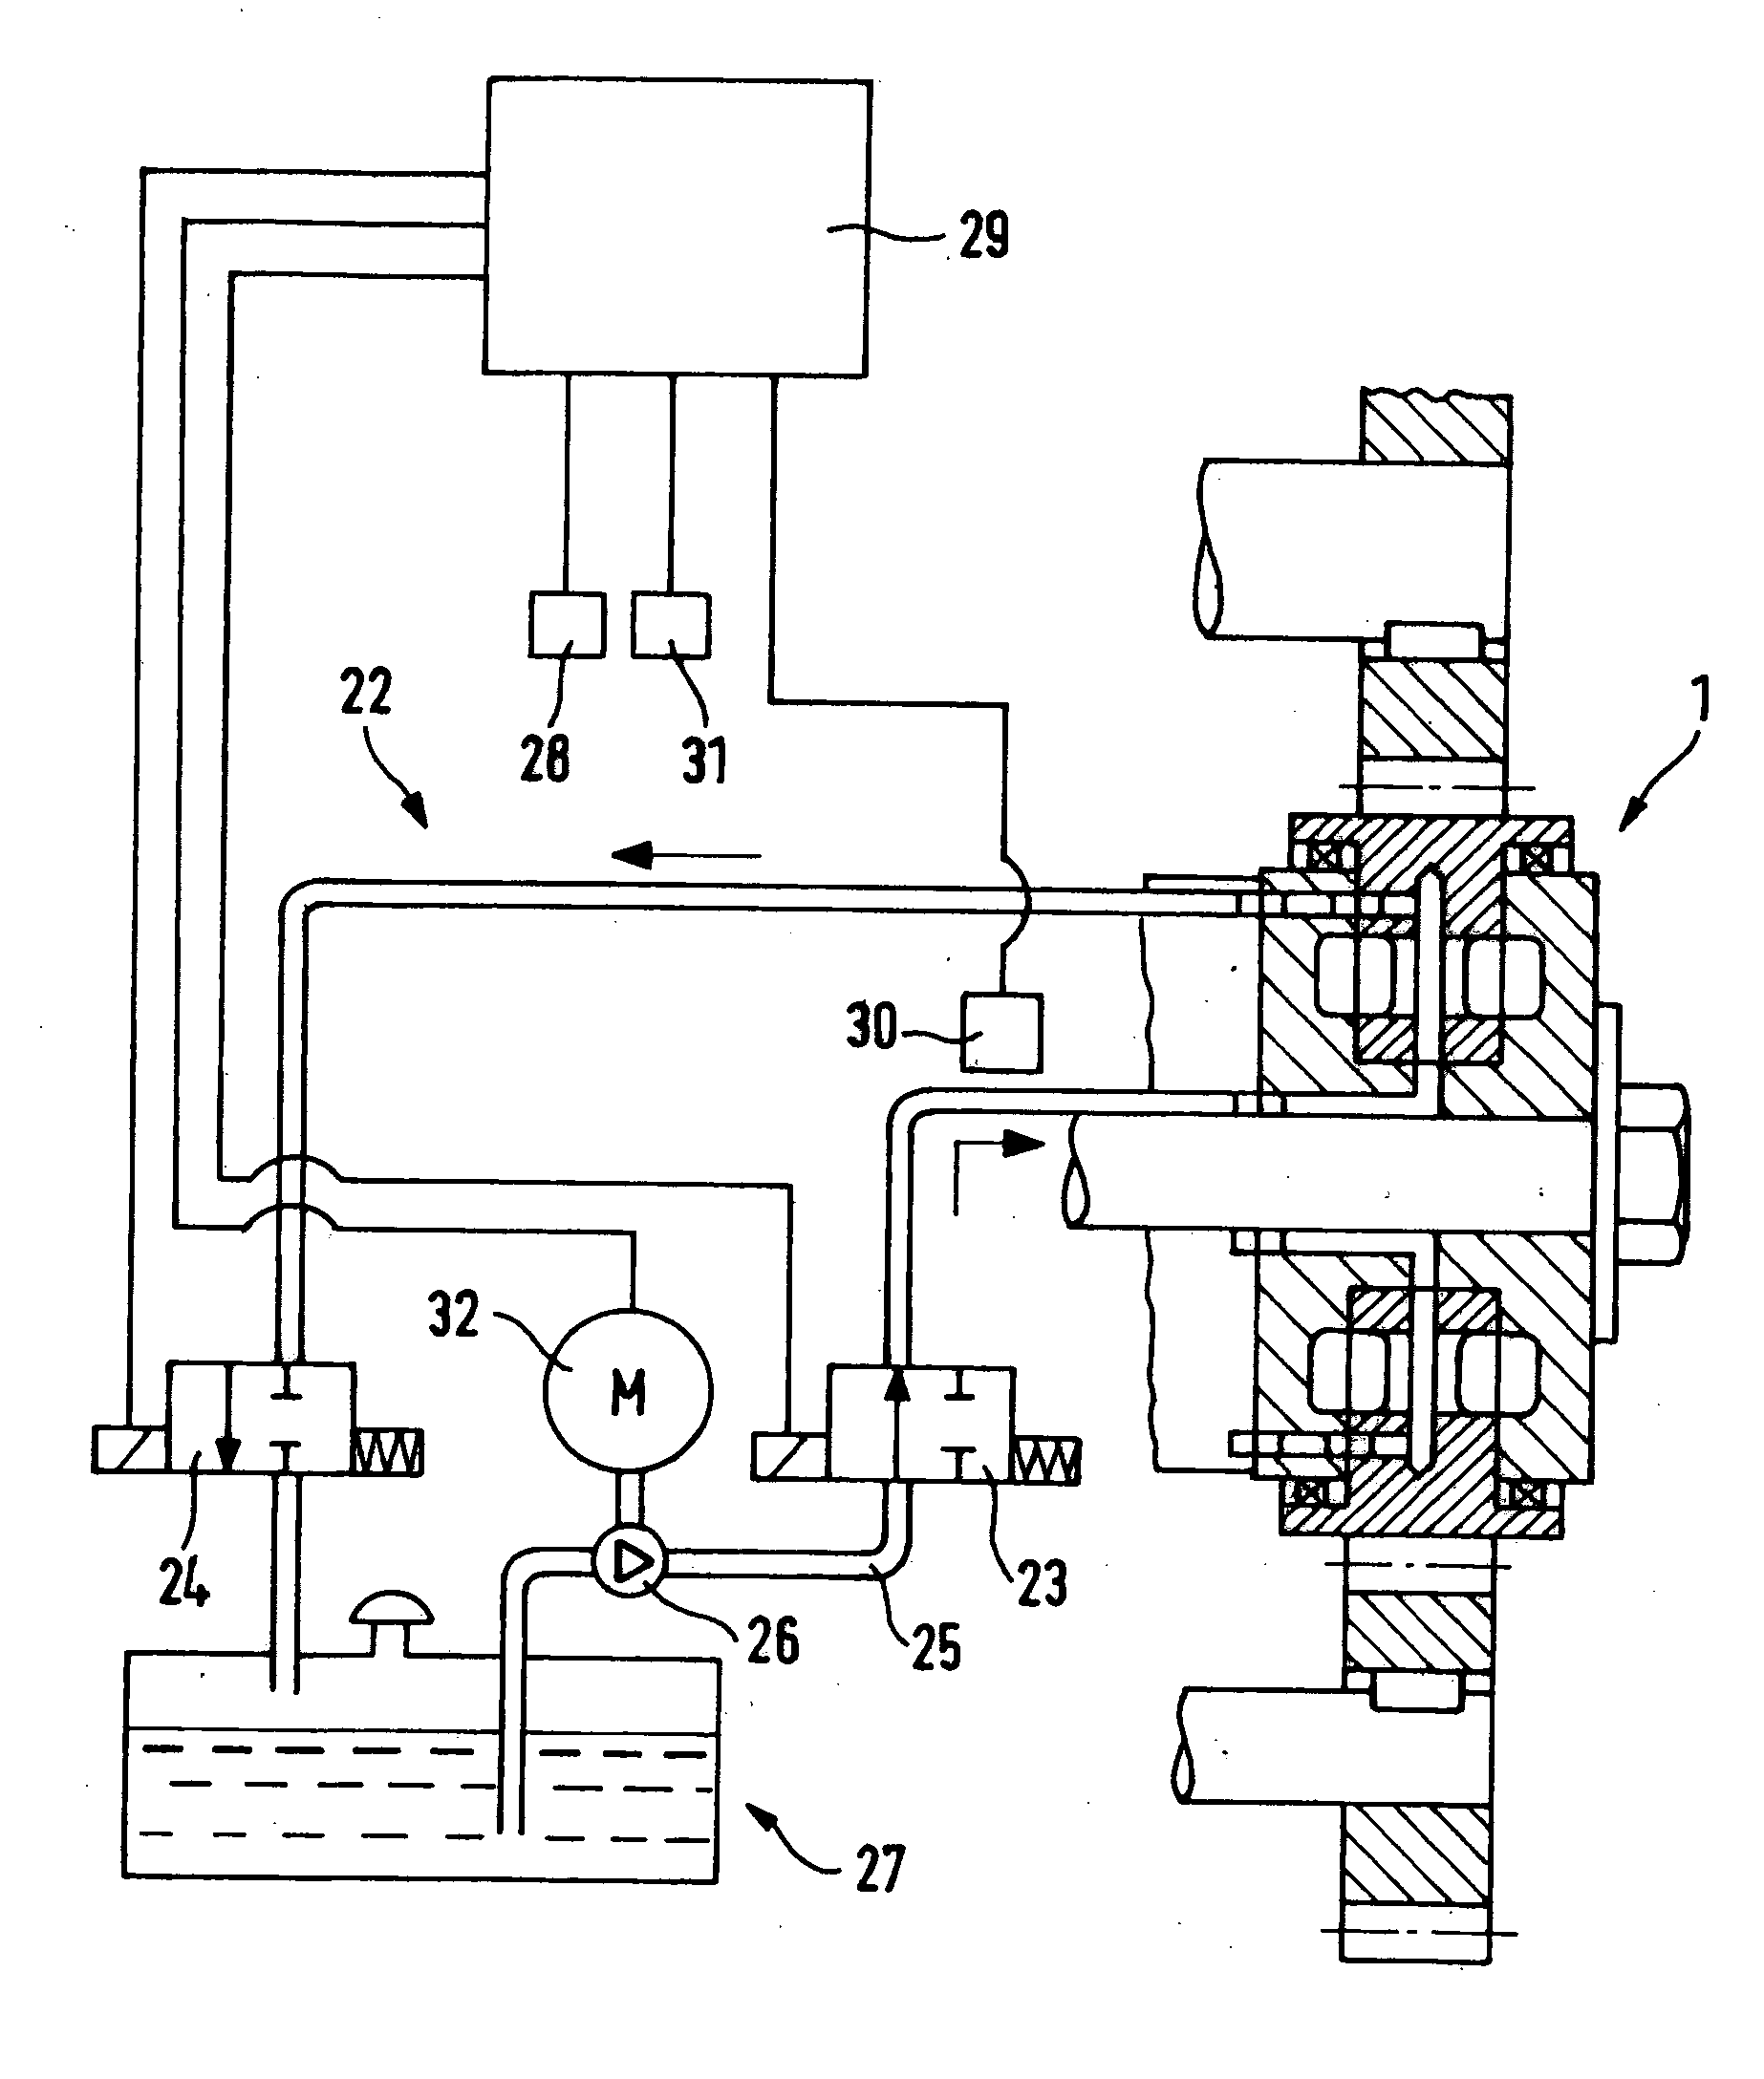 Arrangement and method for coupling an air compressor to the driving shaft of an internal combustion engine